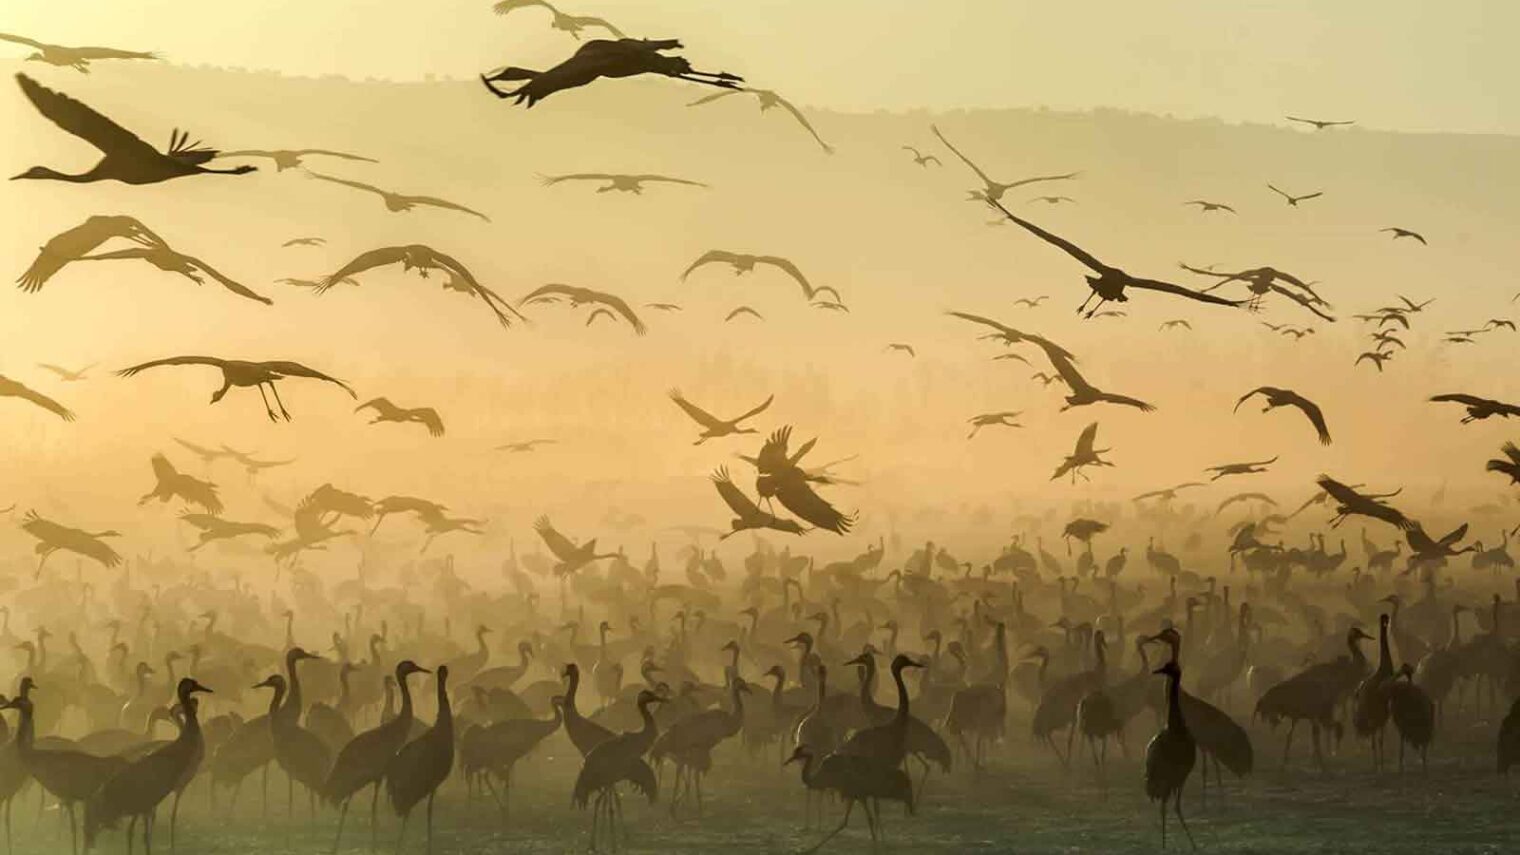 Because 500 million birds migrate across Israel every spring and fall. Silhouettes of cranes at sunrise at the Hula Valley Nature Reserve. Photo by Gal Gross, 2017 Sony World Photography Awards.